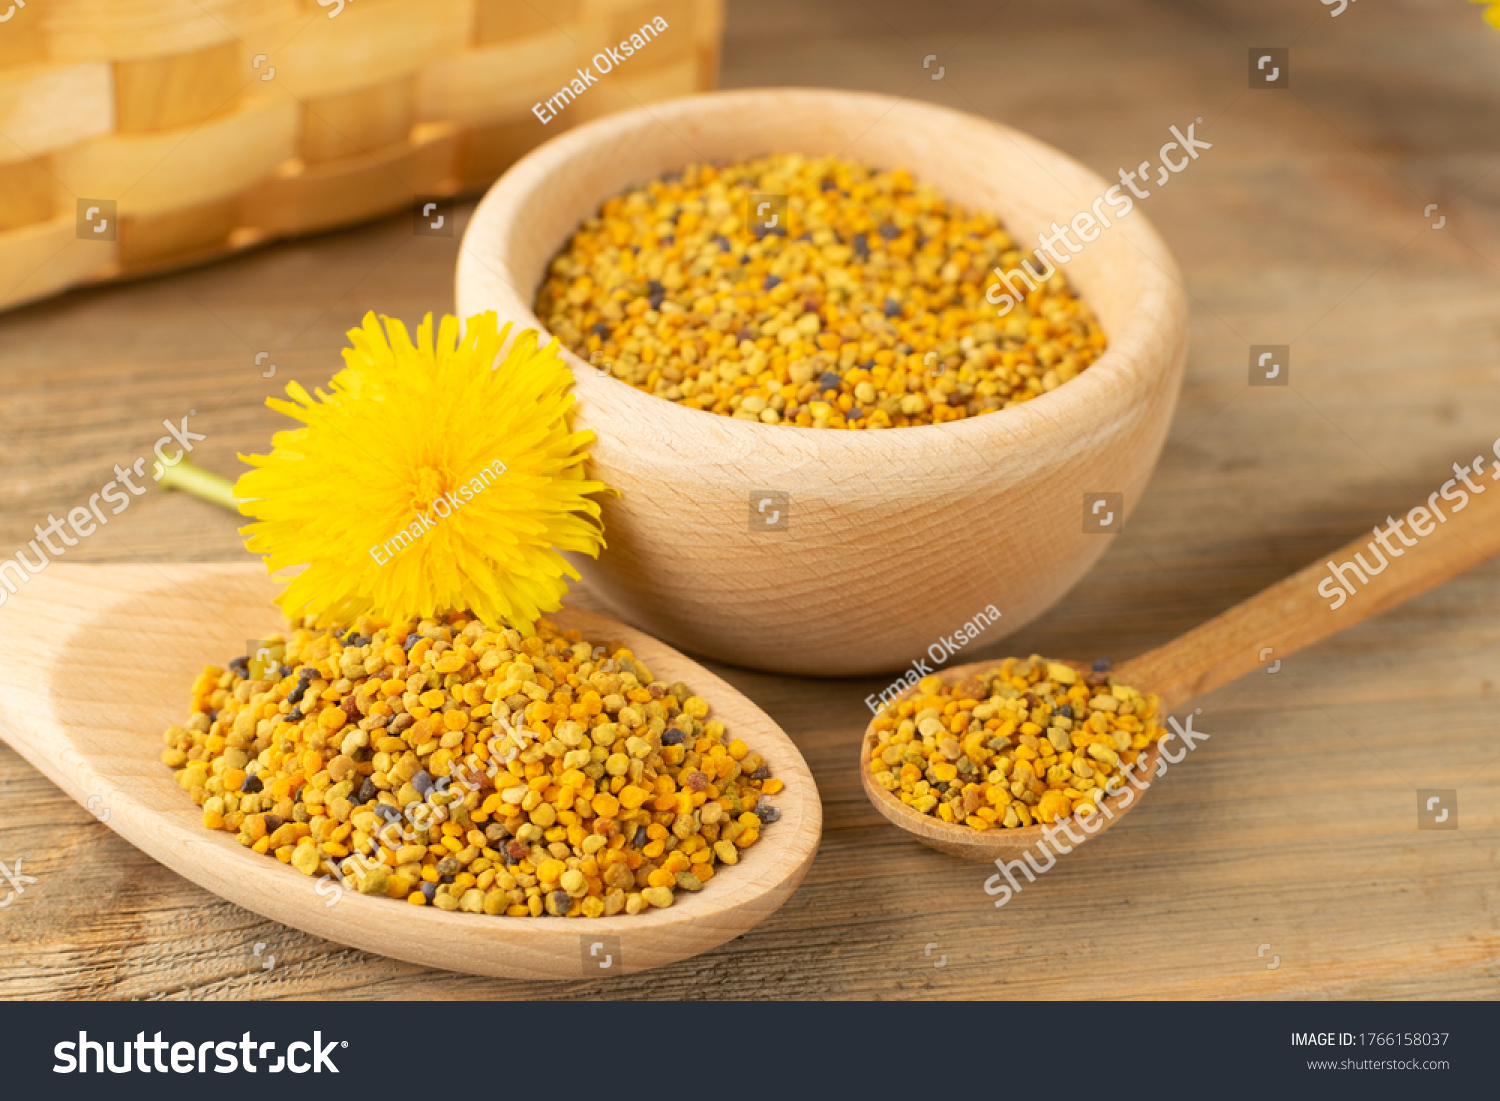 Macro shot of bee pollen or perga in wooden spoon on blurred rustic background. Raw brown, yellow, orange and blue flower pollen grains or bee bread. Healthy food supplement with selective focus #1766158037